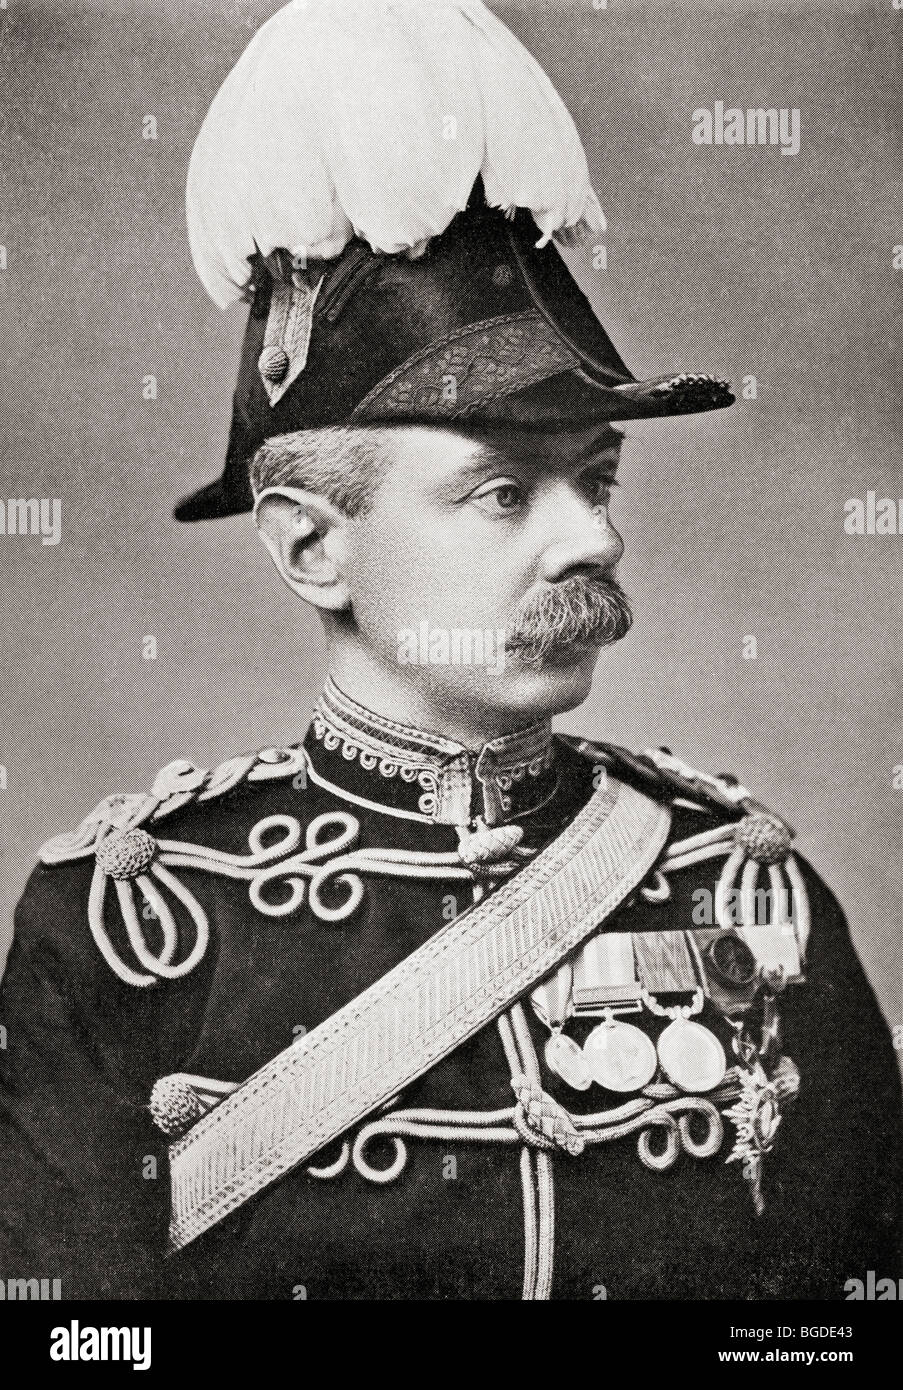 Field Marshal Herbert Charles Onslow Plumer, 1st Viscount Plumer, 1857 to 1932. British colonial official and soldier. Stock Photo